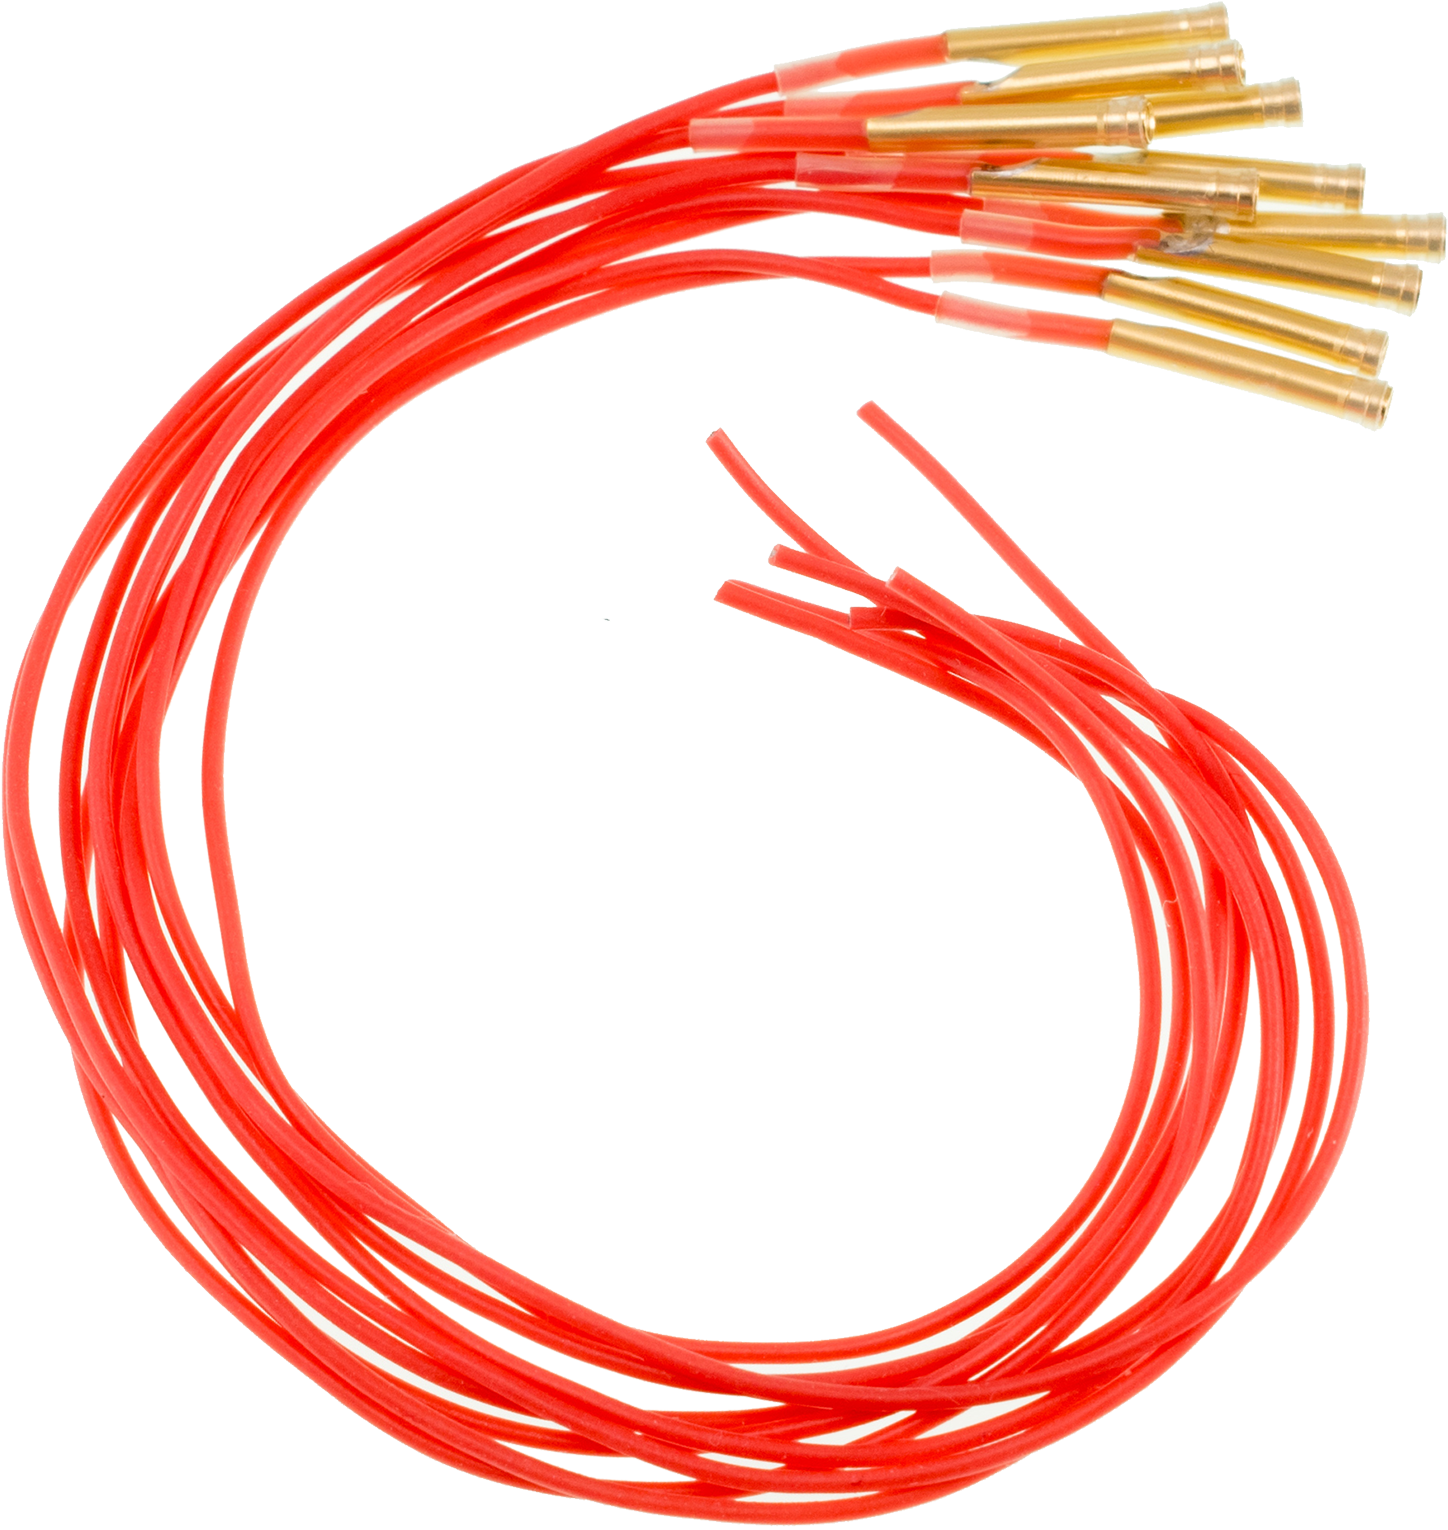 A Red Wire With Gold Tips